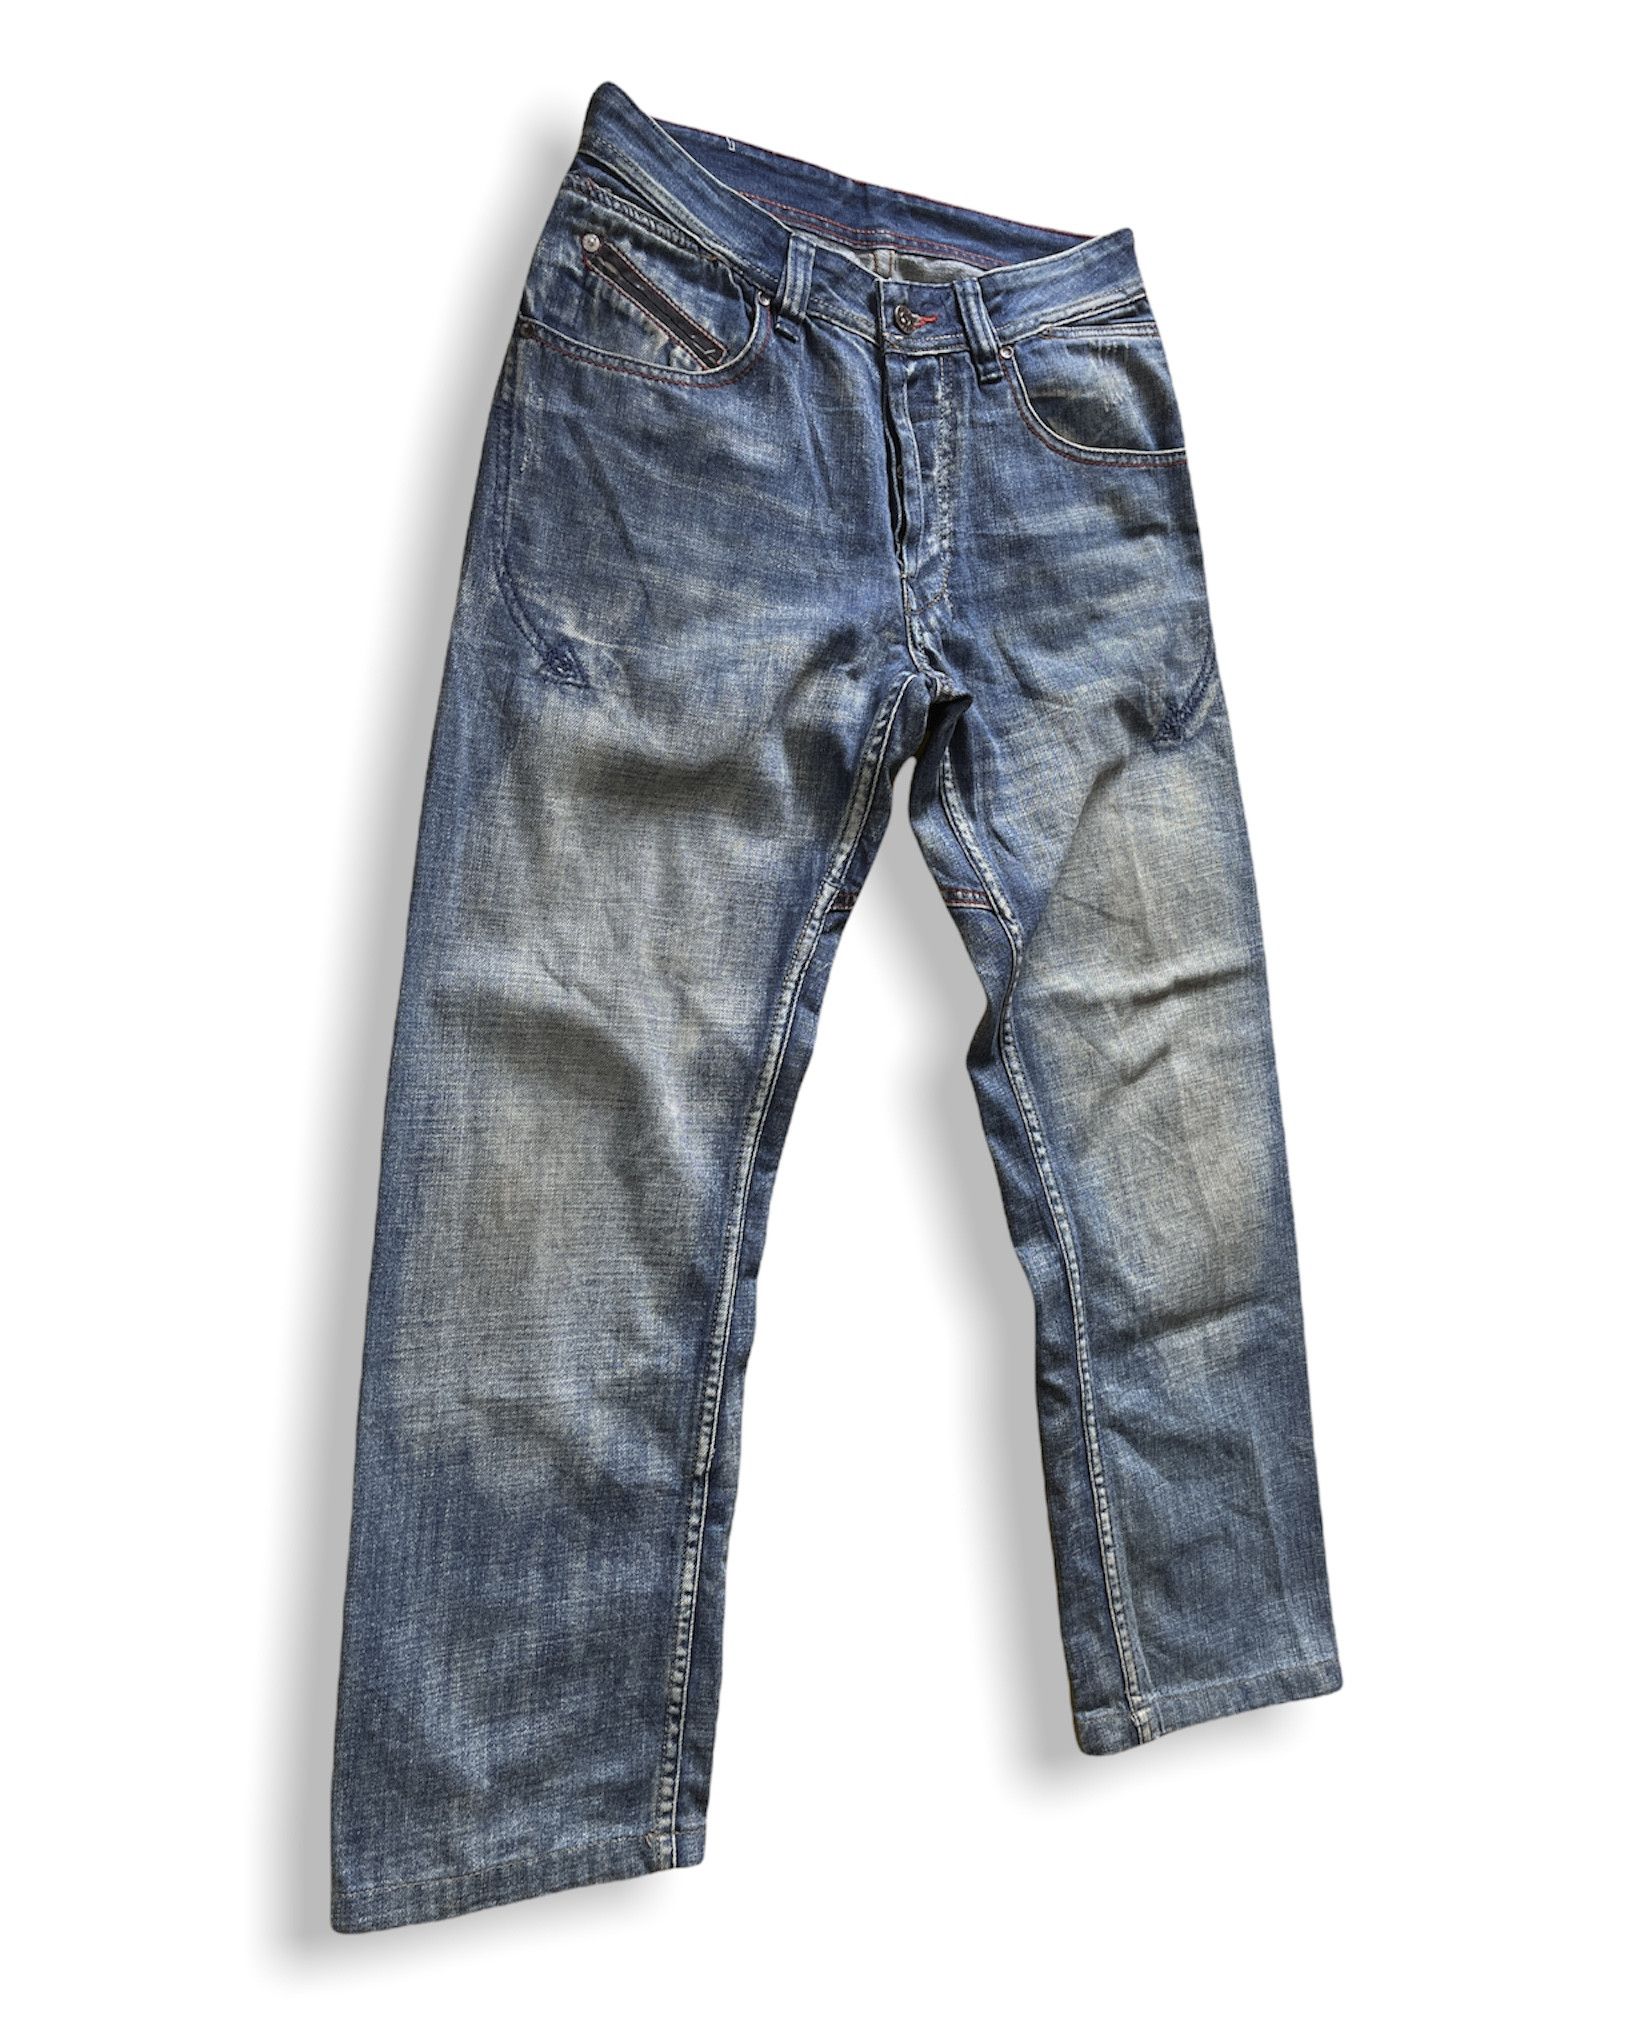 VINTAGE FADED DIESEL FLARE DENIM JEANS MADE IN ITALY - 4